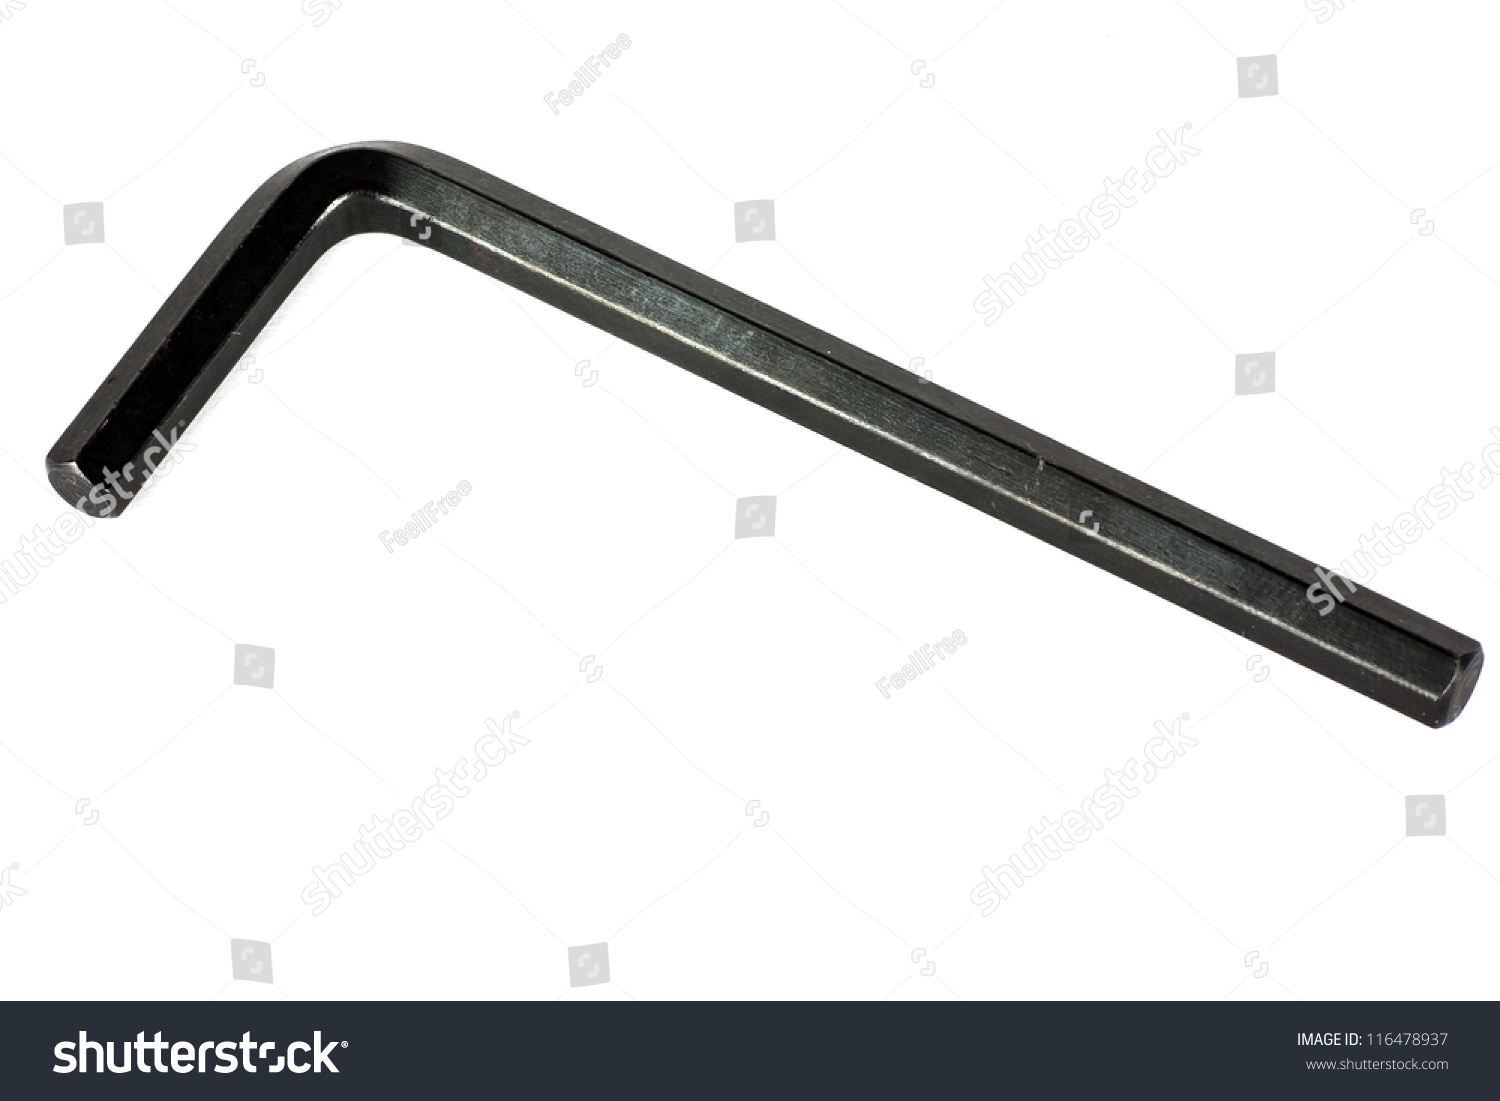 Find Allen Wrench Isolated On White stock images in HD and millions of othe...